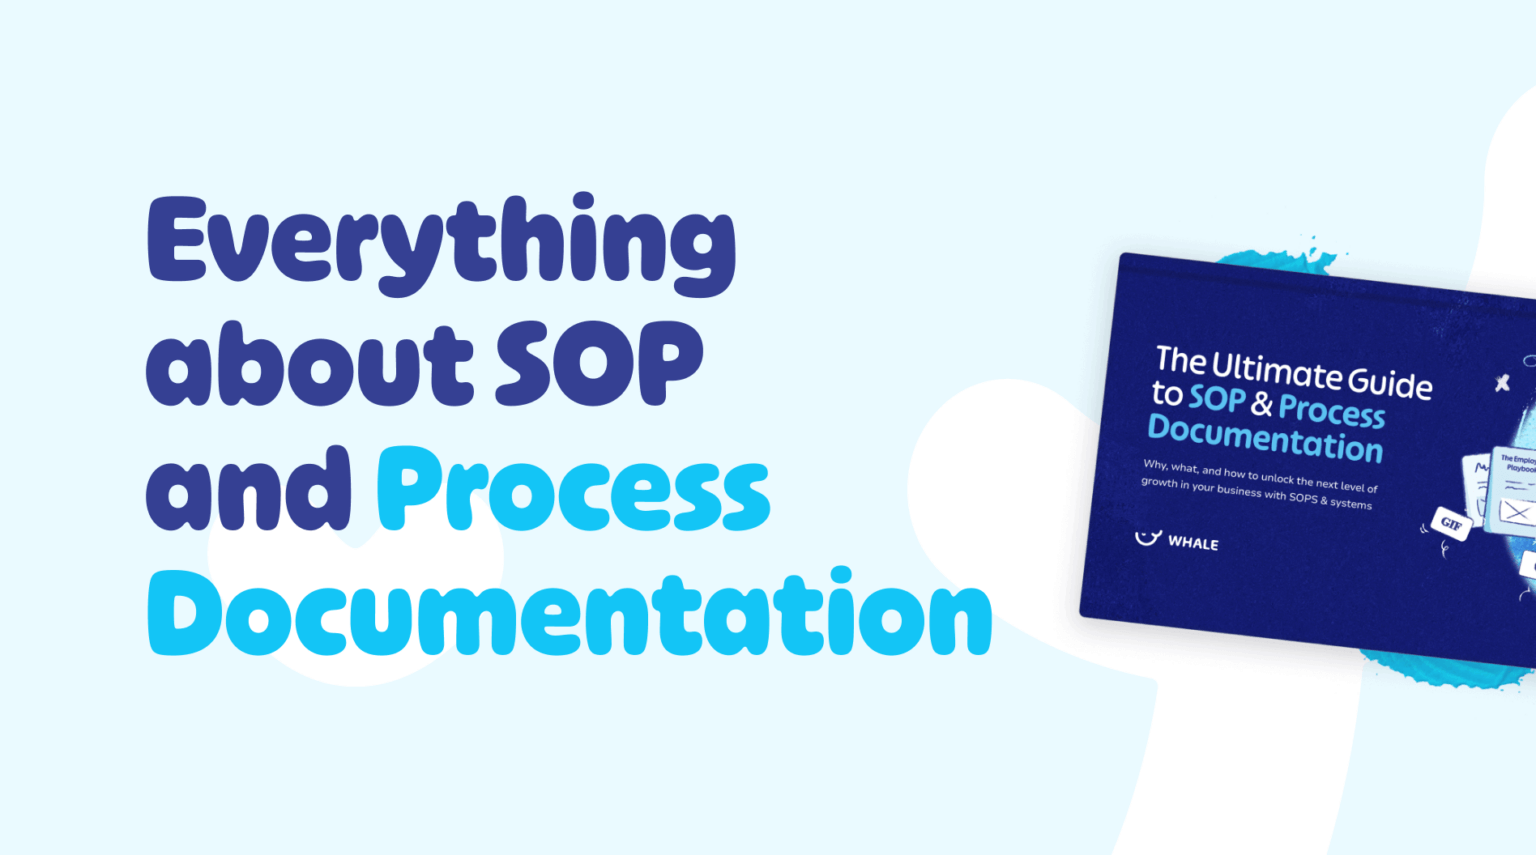 An all-inclusive guide on SOP and process documentation.